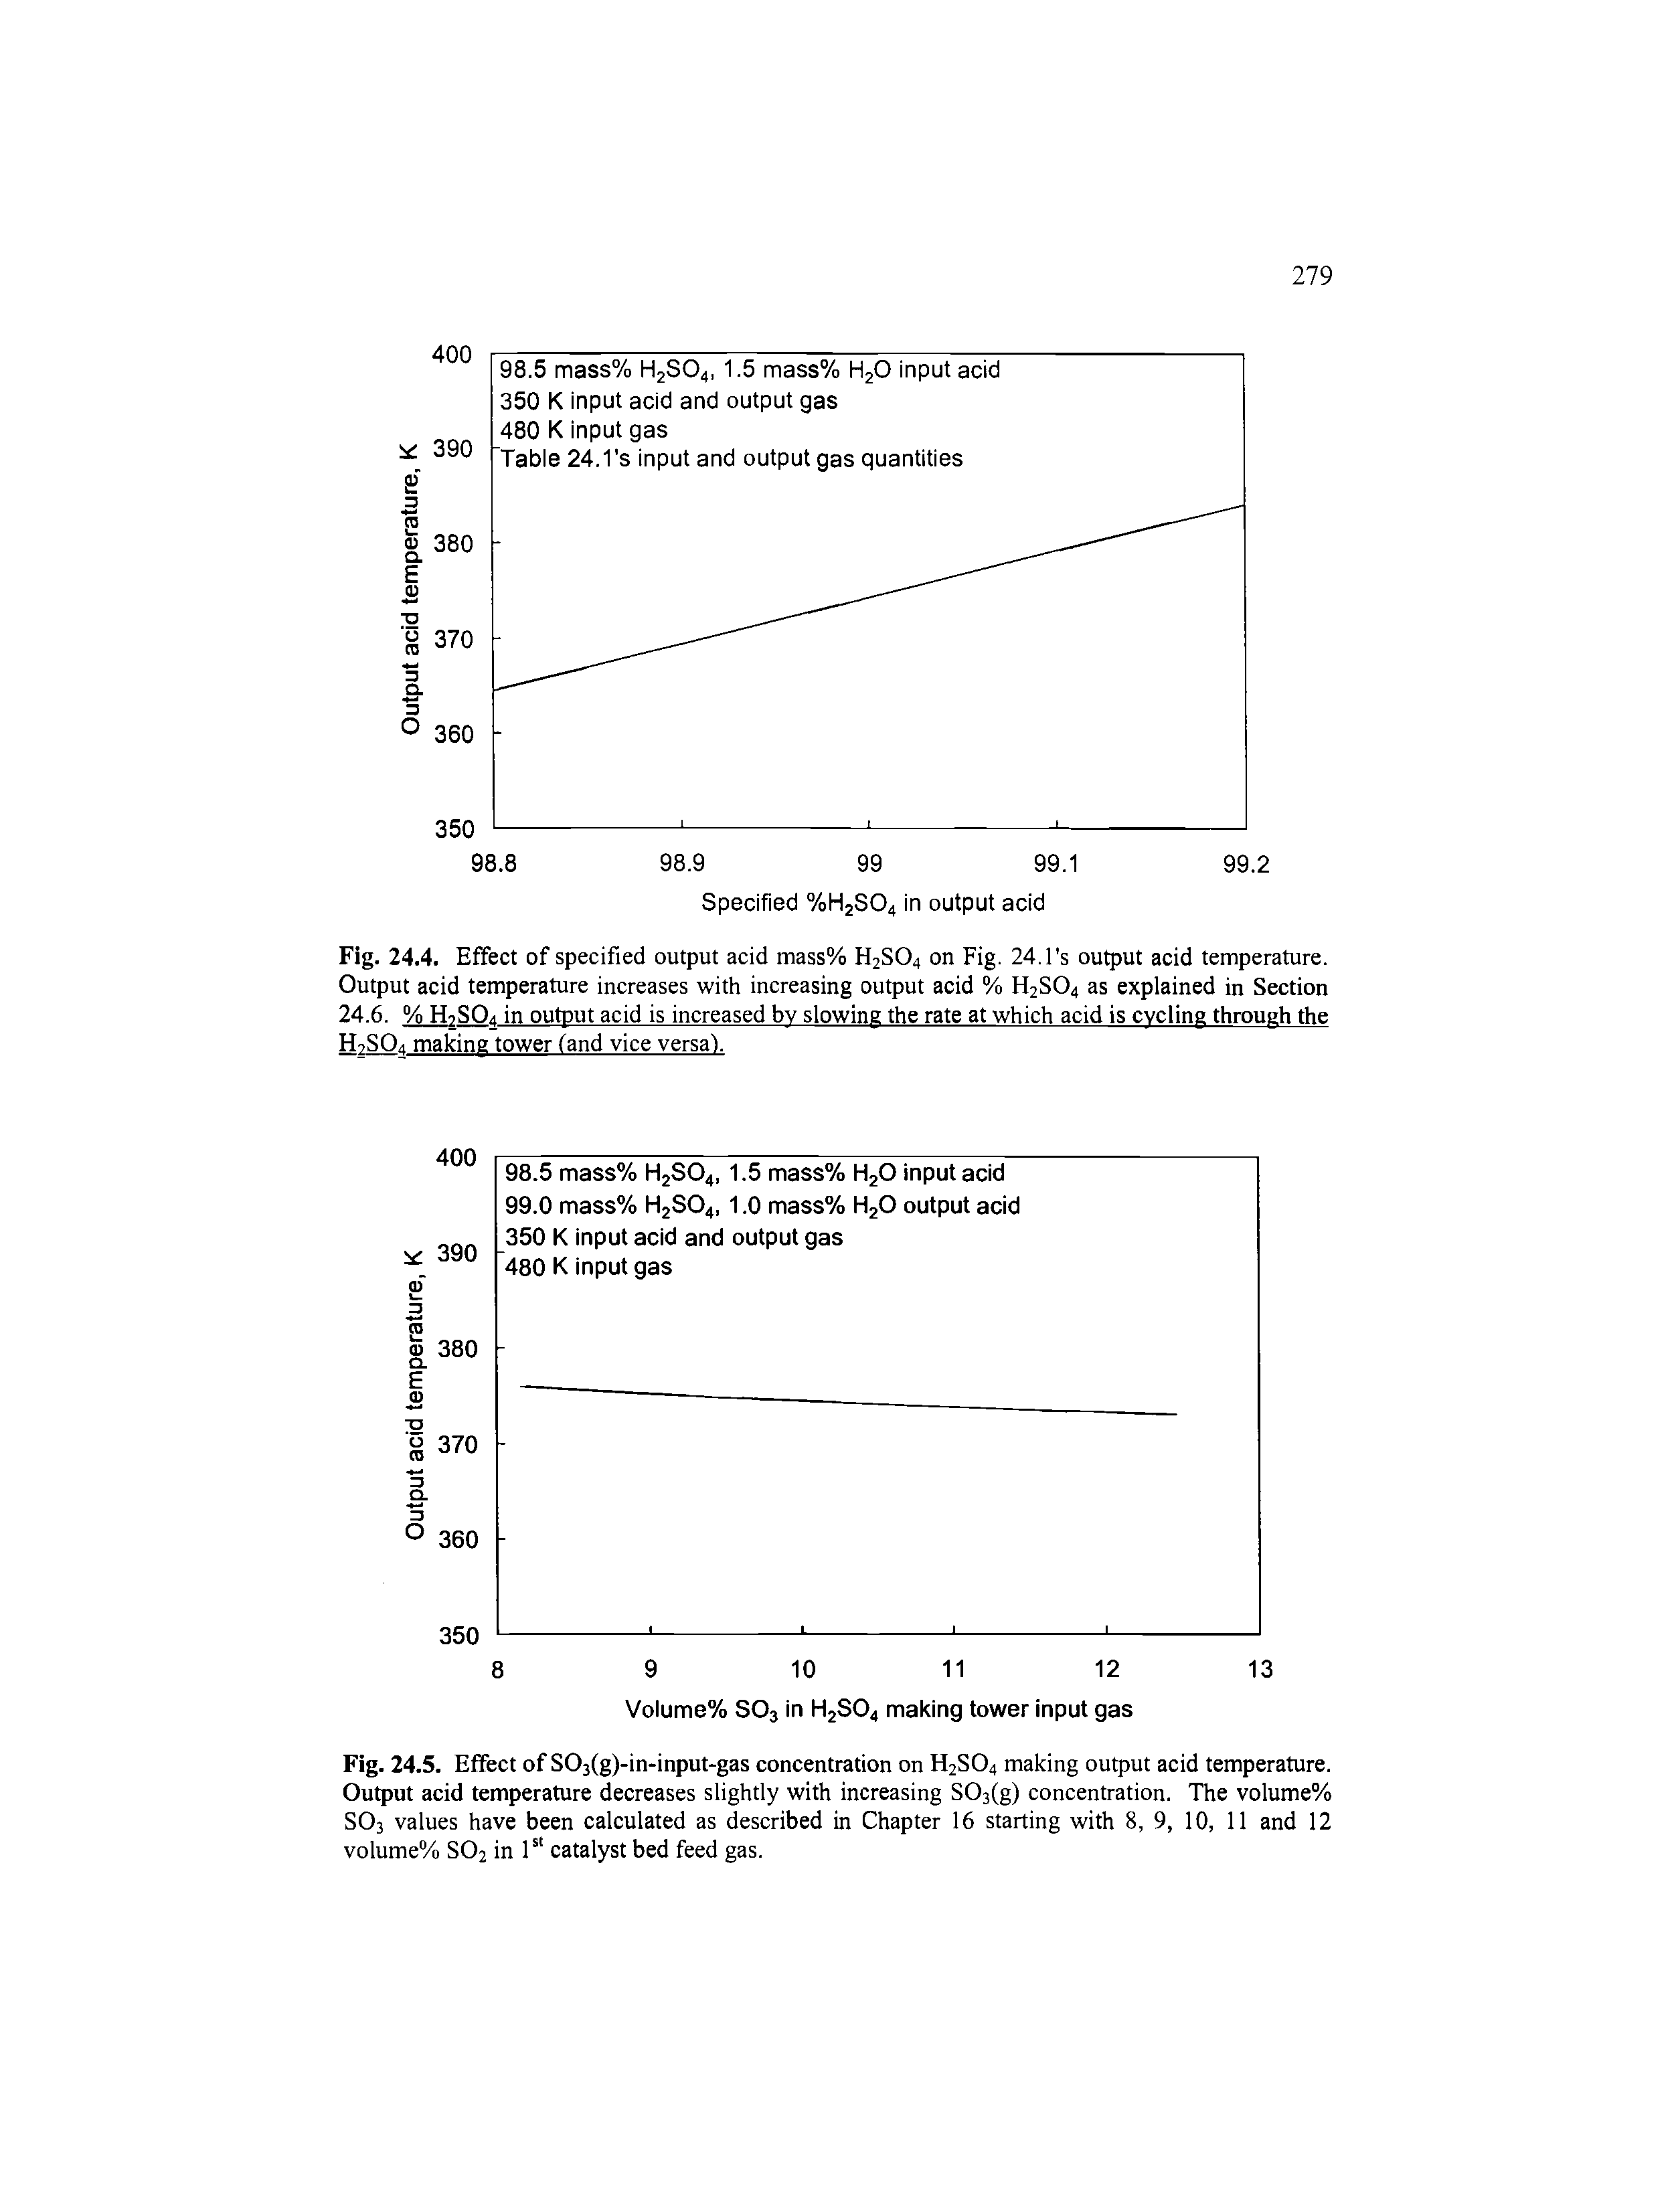 Fig. 24.5. Effect of S03(g)-in-input-gas concentration on H2SO4 making output acid temperature. Output acid temperature decreases slightly with increasing SOs(g) concentration. The volume% SO3 values have been calculated as described in Chapter 16 starting with 8, 9, 10, 11 and 12 volume% SO2 in 1 catalyst bed feed gas.